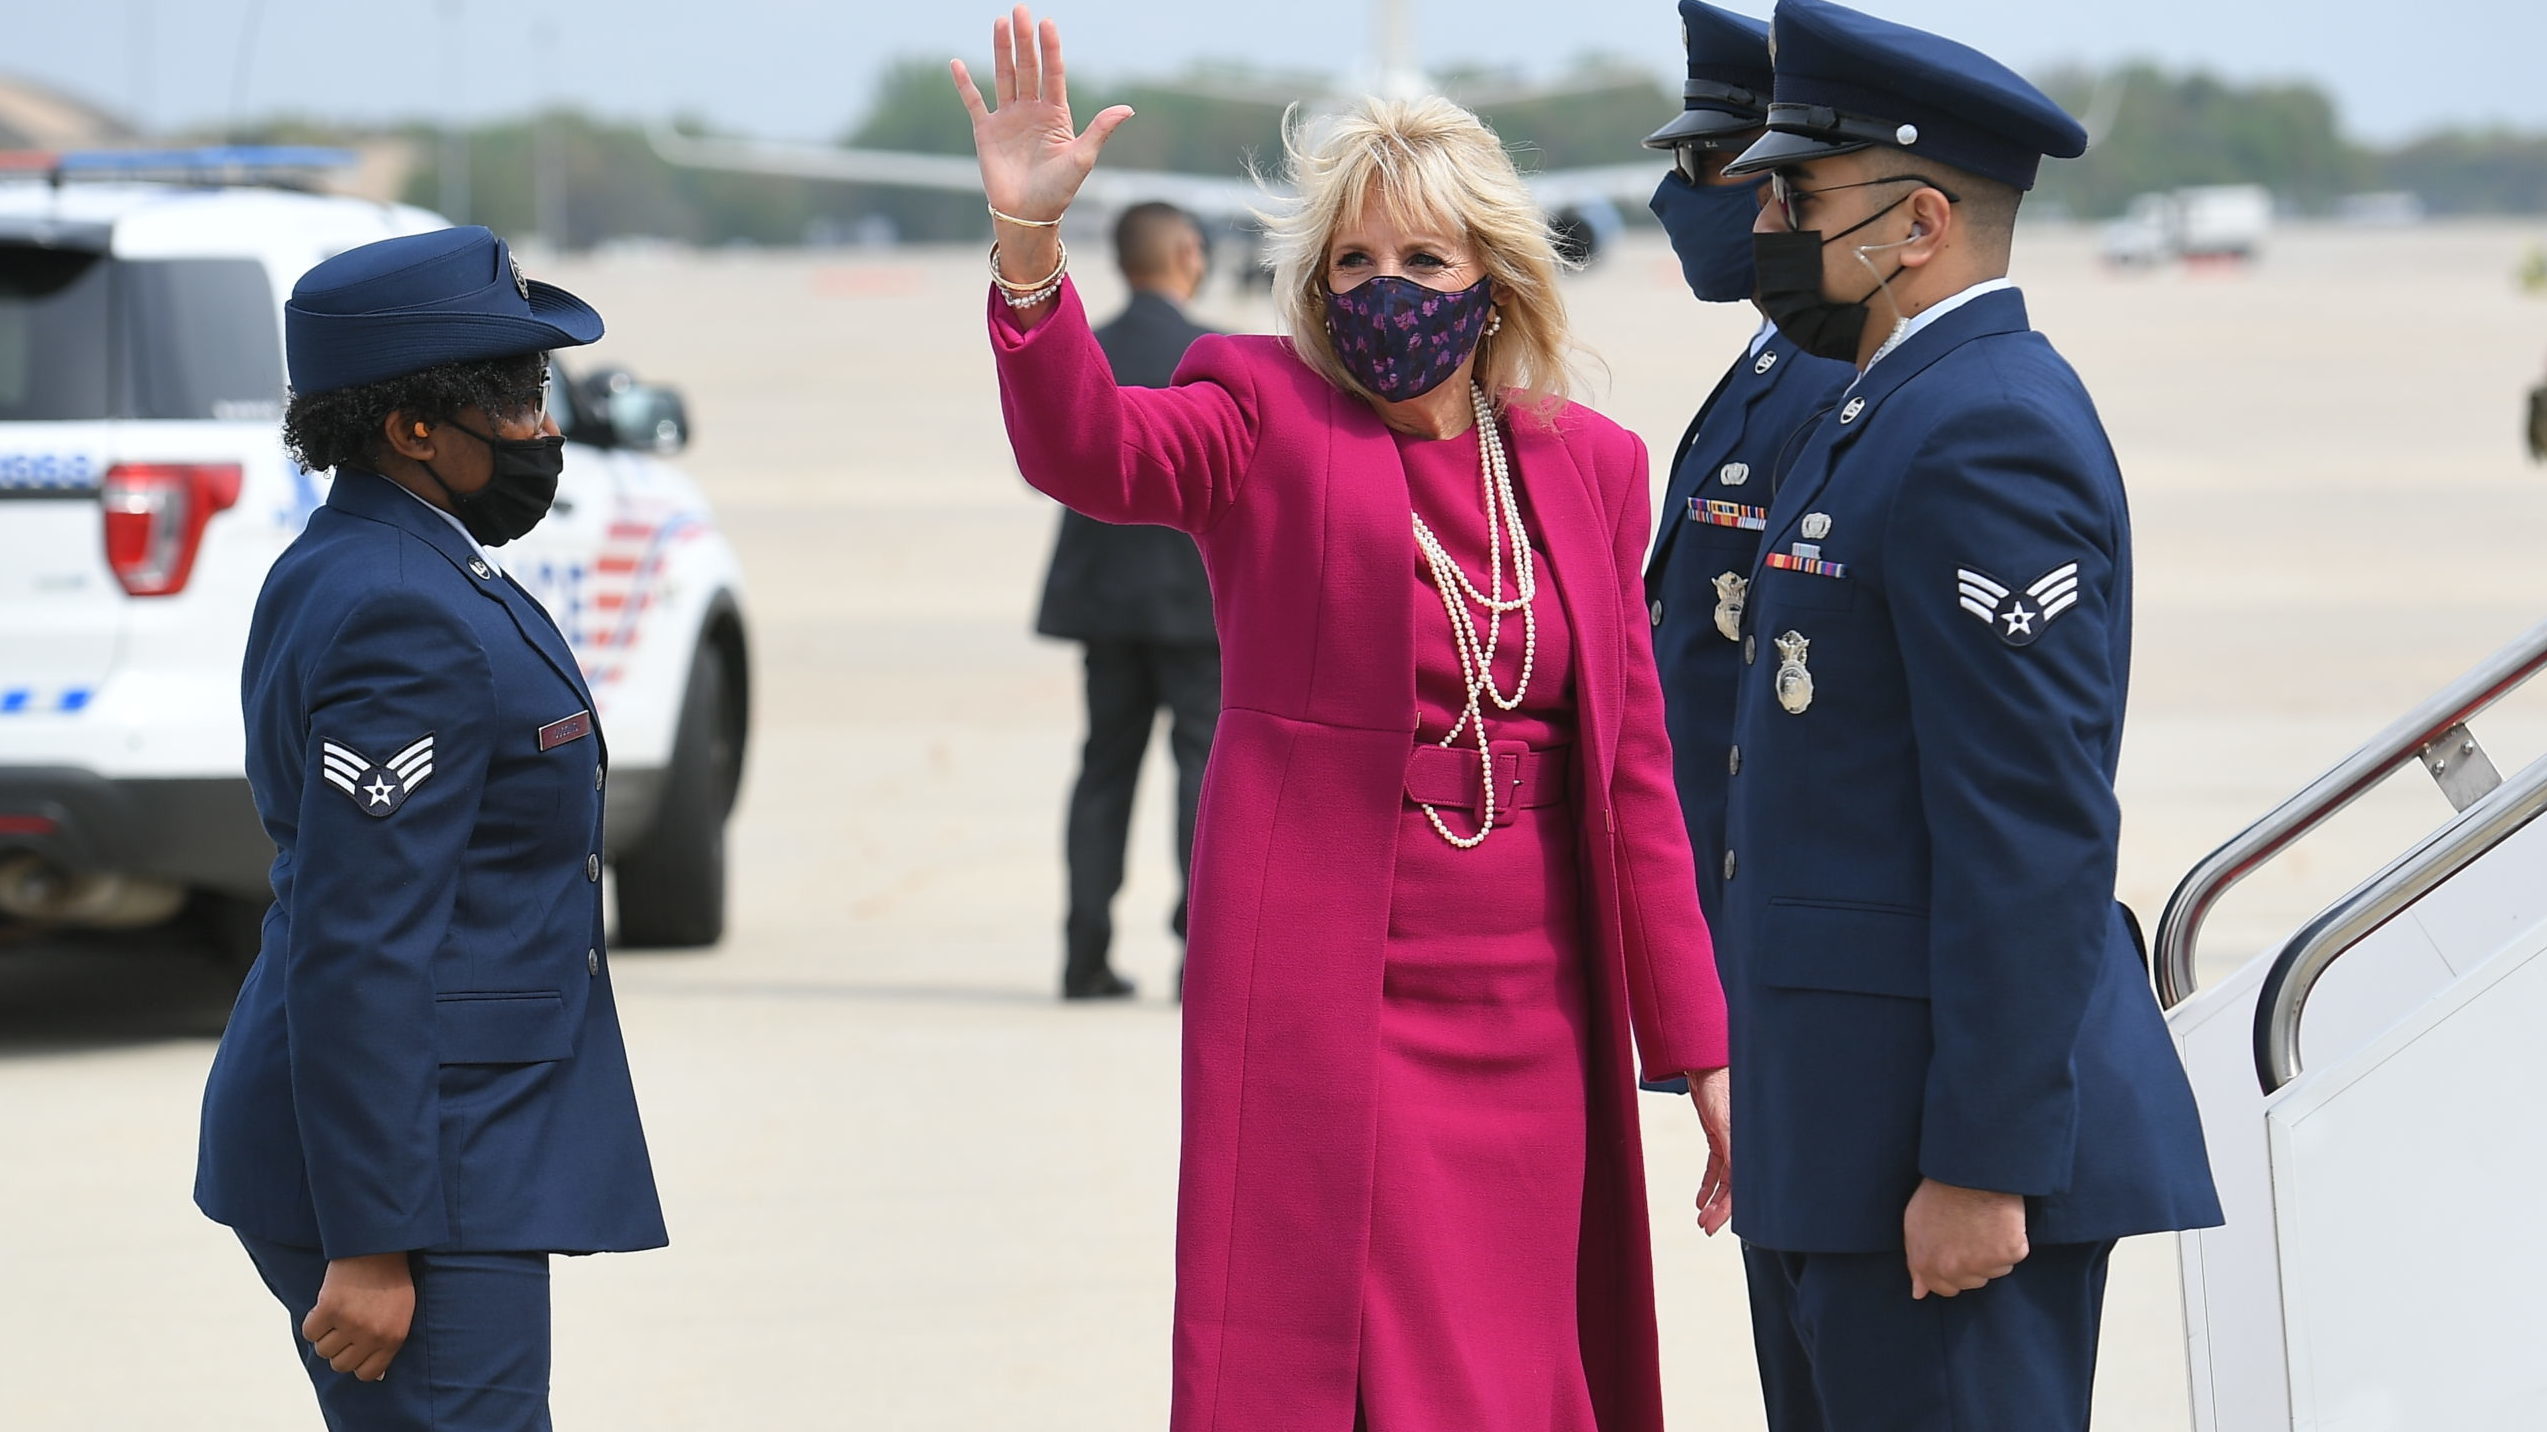 Jill biden pictured. she tested positive for covid-19...